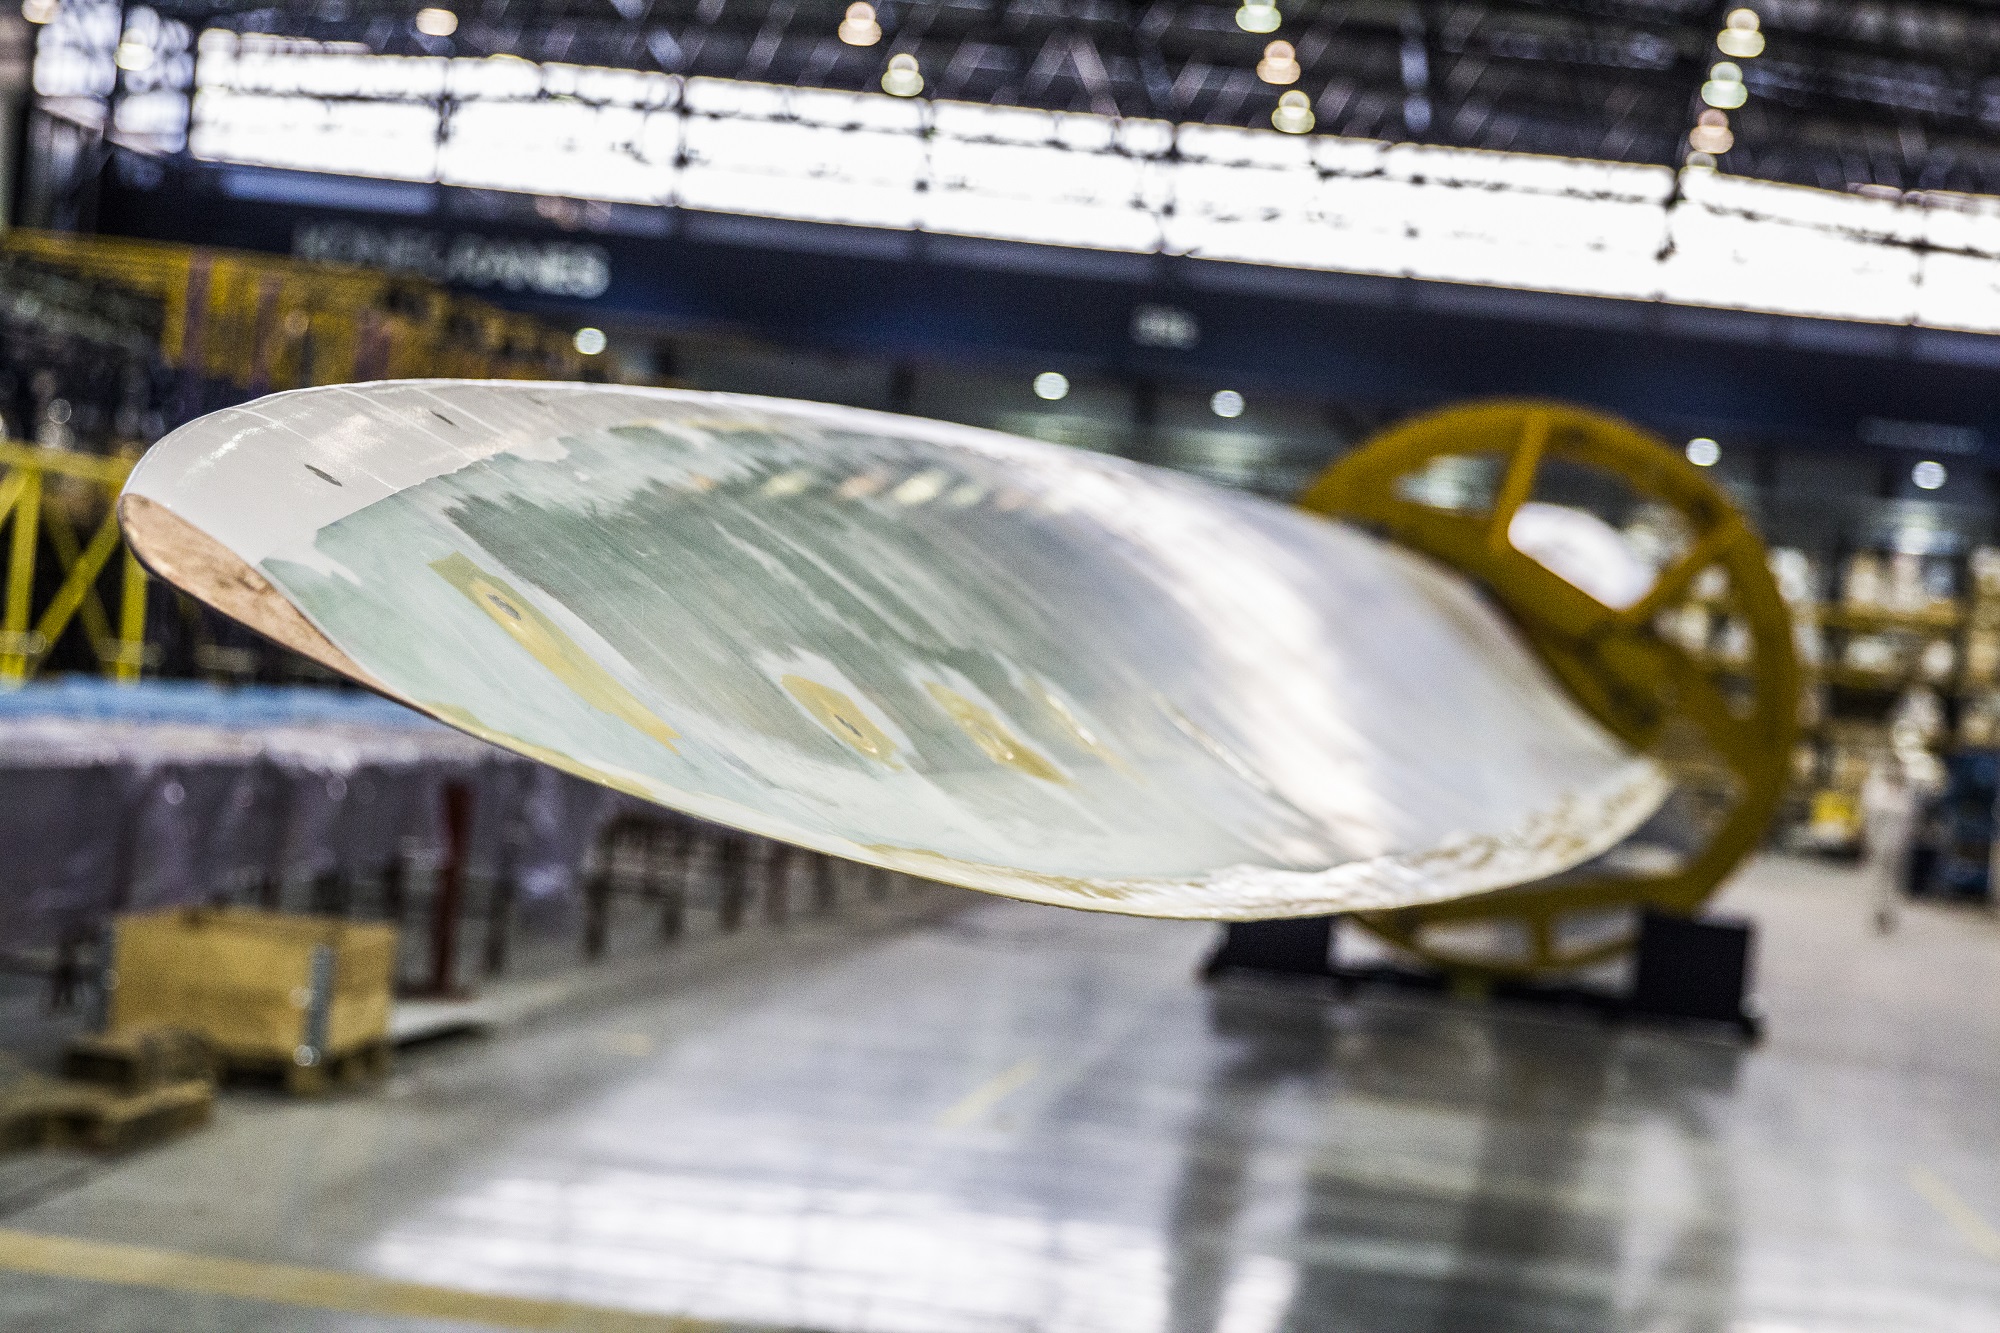 MHI Vestas Offshore Wind to Produce V164-8.0 Blades on Isle of Wight